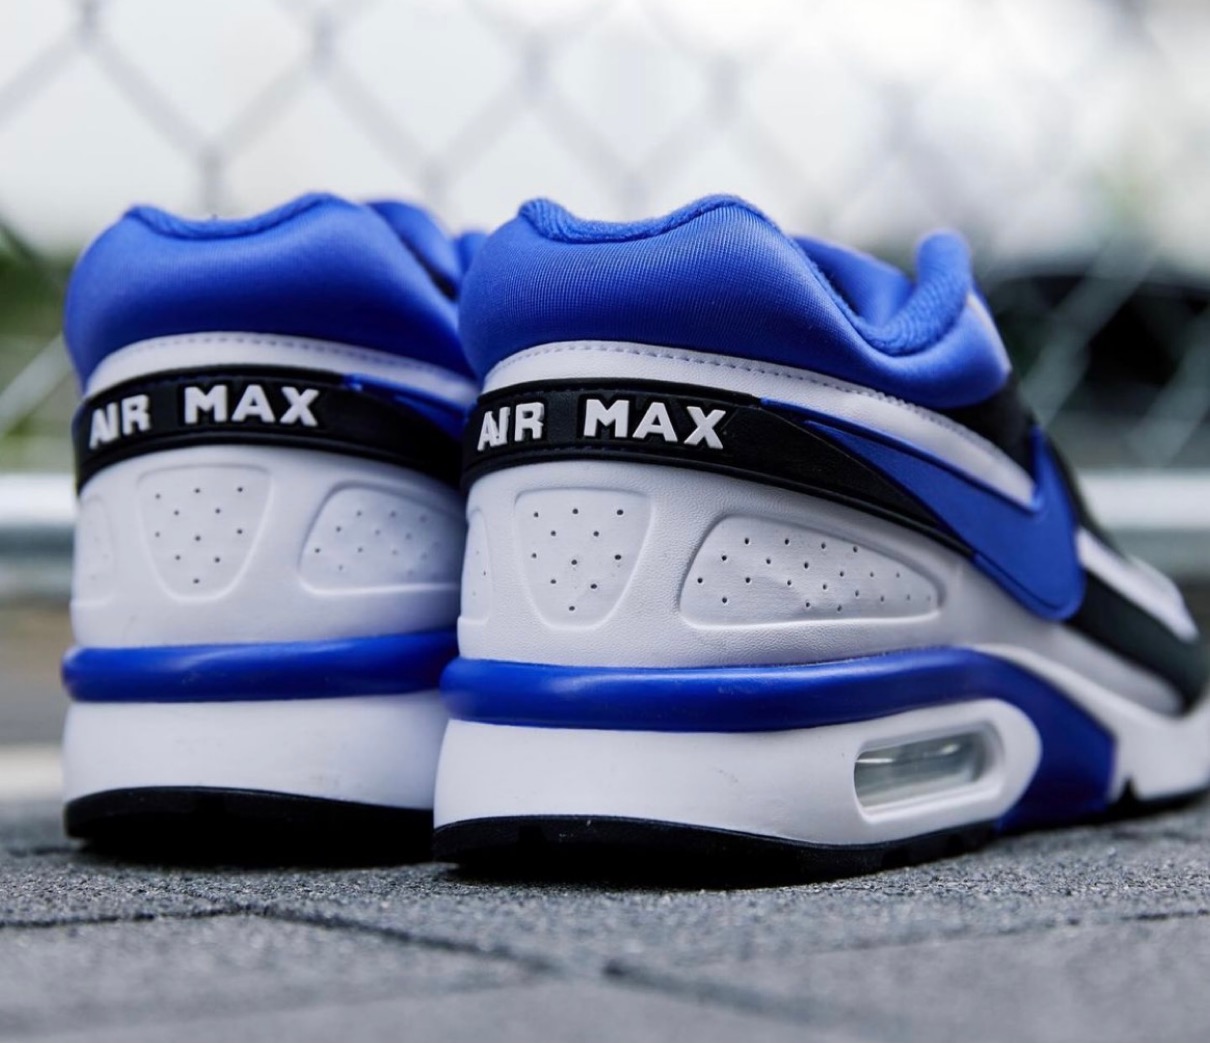 Nike】Air Max BW OG “Persian Violet”が国内2021年7月22日に復刻発売予定 | UP TO DATE